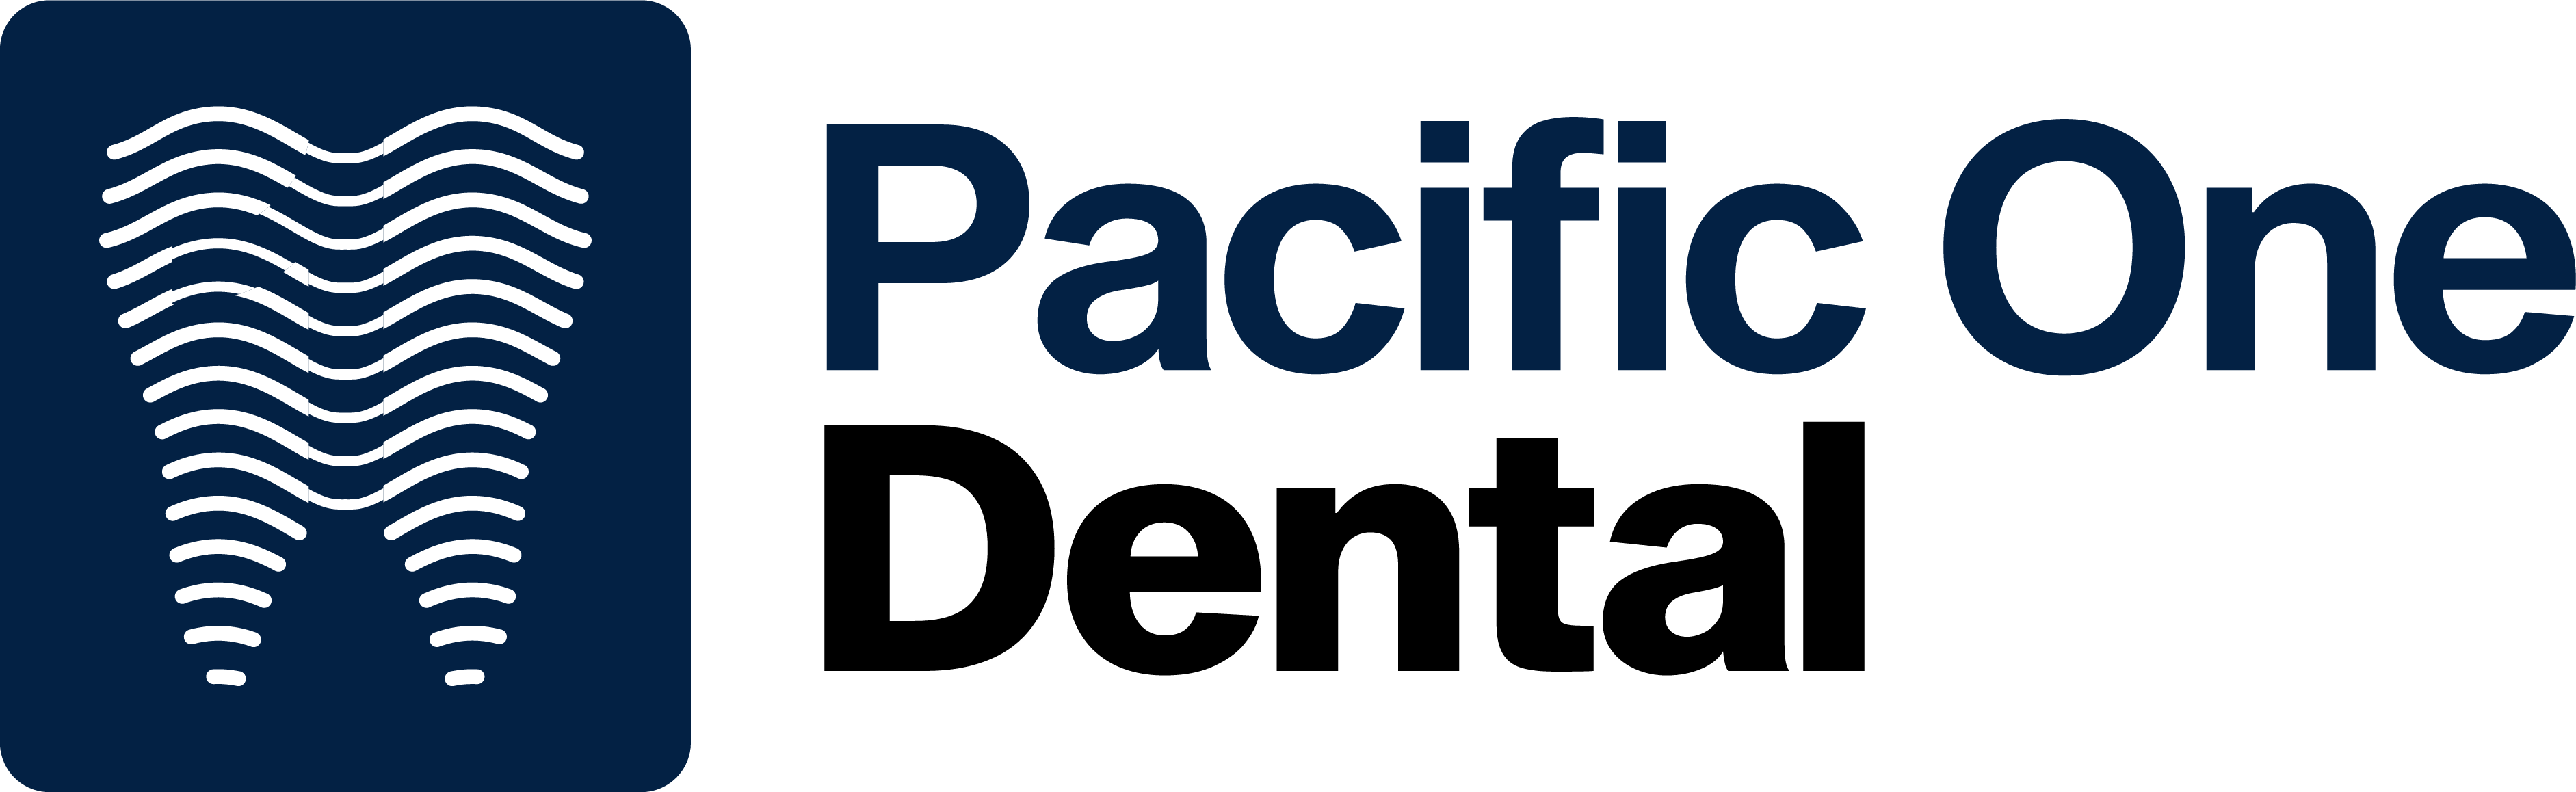 Pacific One Dental